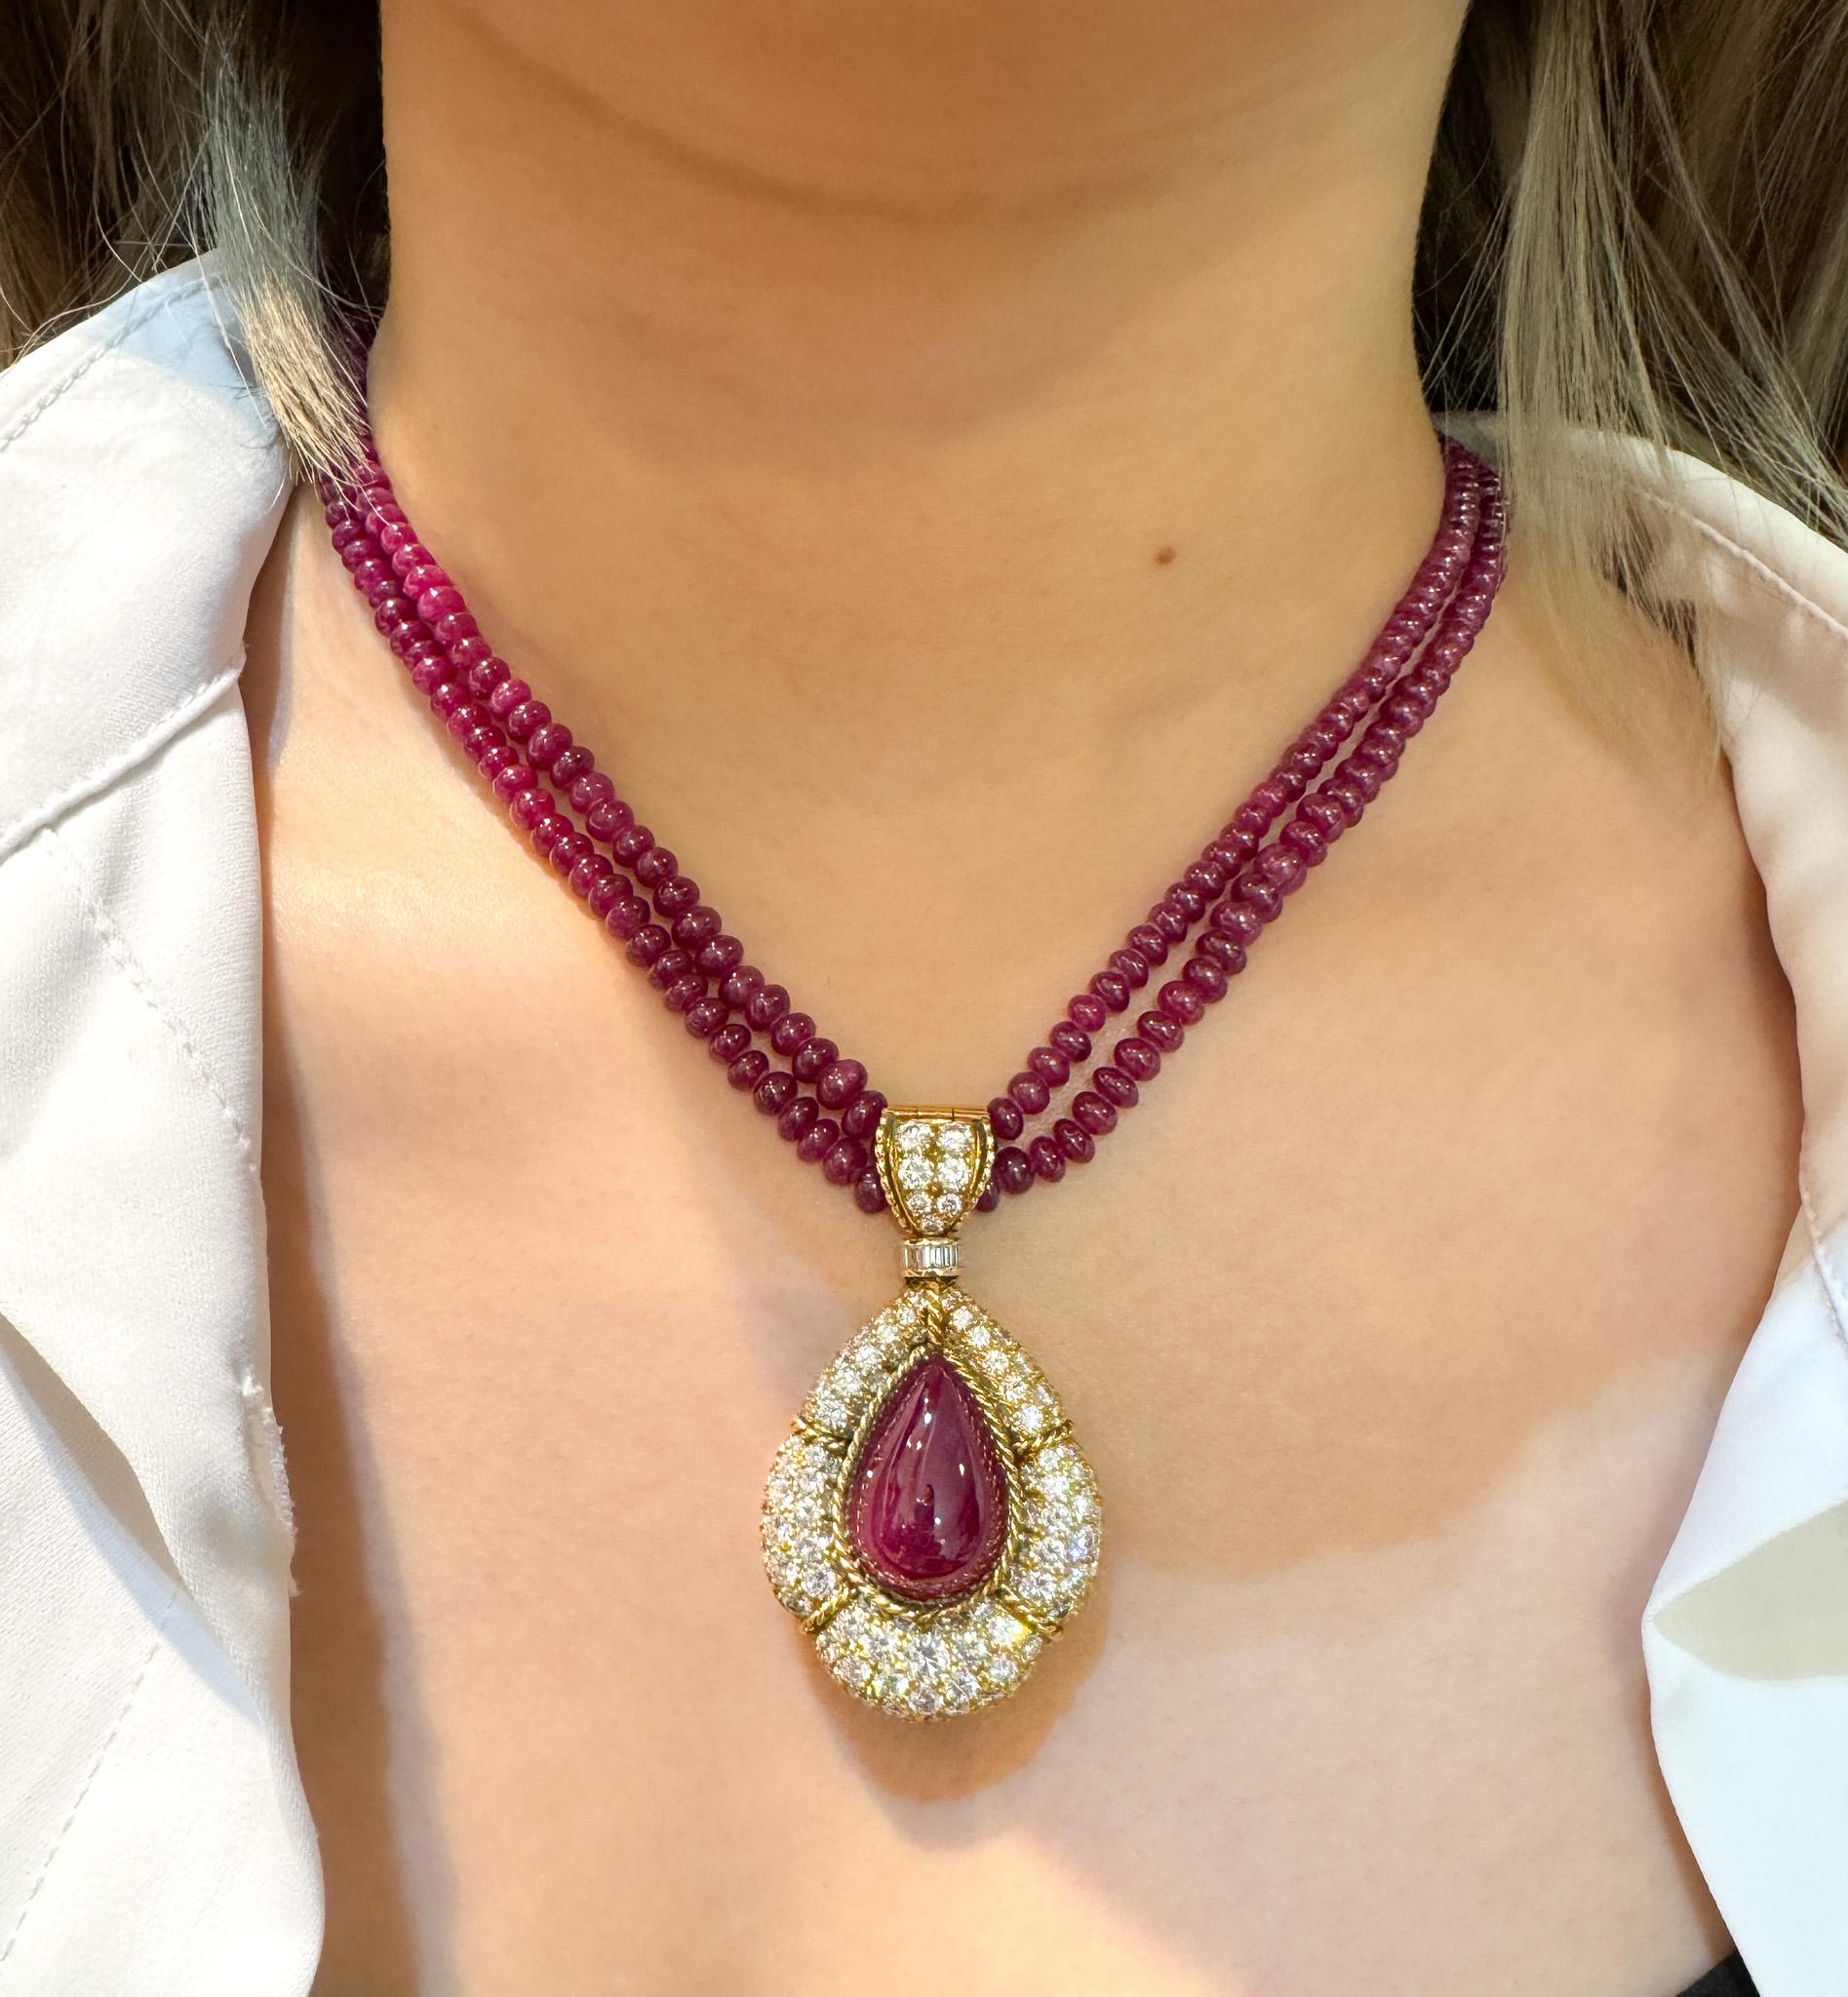 Vintage 22.41 Carat No Heat Pear Cabochon Cut Ruby and Diamond Pendant with a 2-Strand Ruby Bead Necklace by Tiffany & Co. 

Pendant Details: 
- Metal: 18K Gold
- Gross Weight: 27.57 Grams
- Gemstone: Ruby 
- Carat: 22.41 CTTW
- Color: Red 
- Cut: